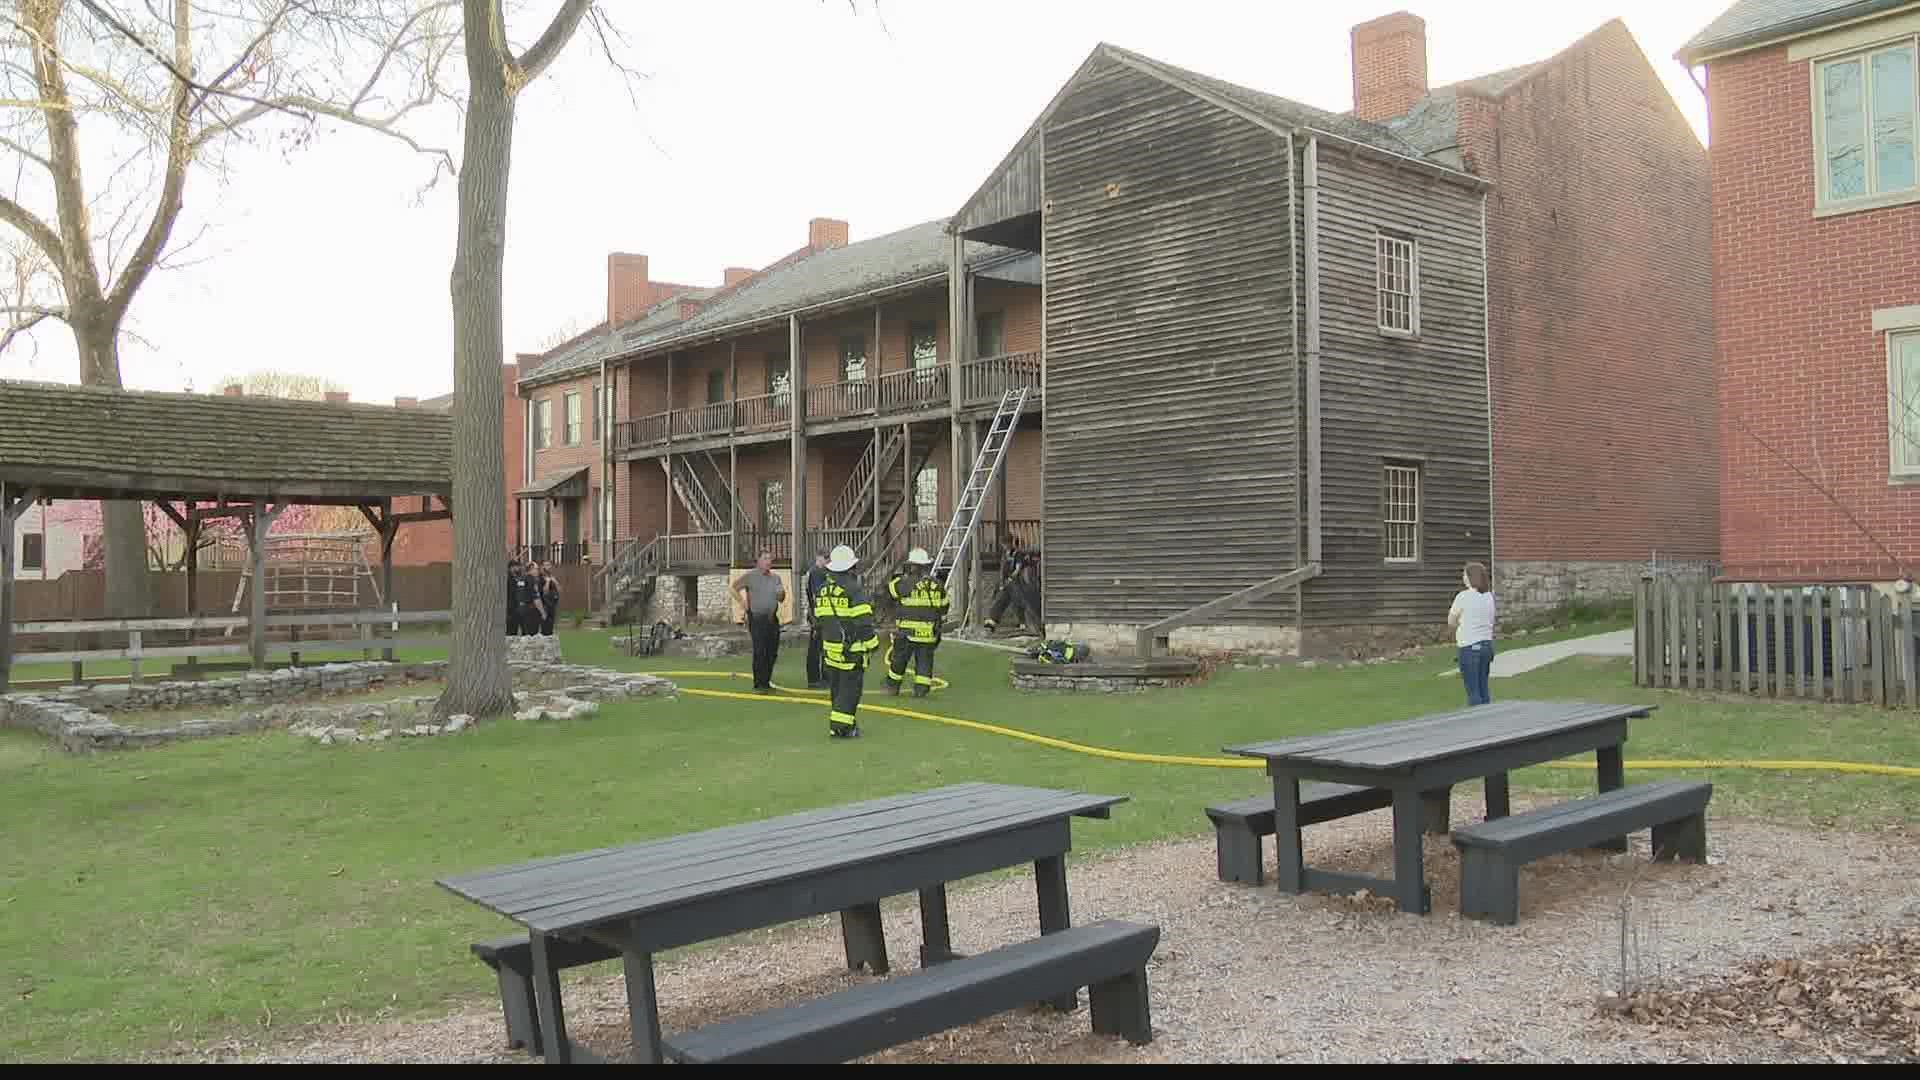 Bystanders noticed smoke coming from the St. Charles building Sunday night.  The building housed Missouri's first government from 1821 to 1826.